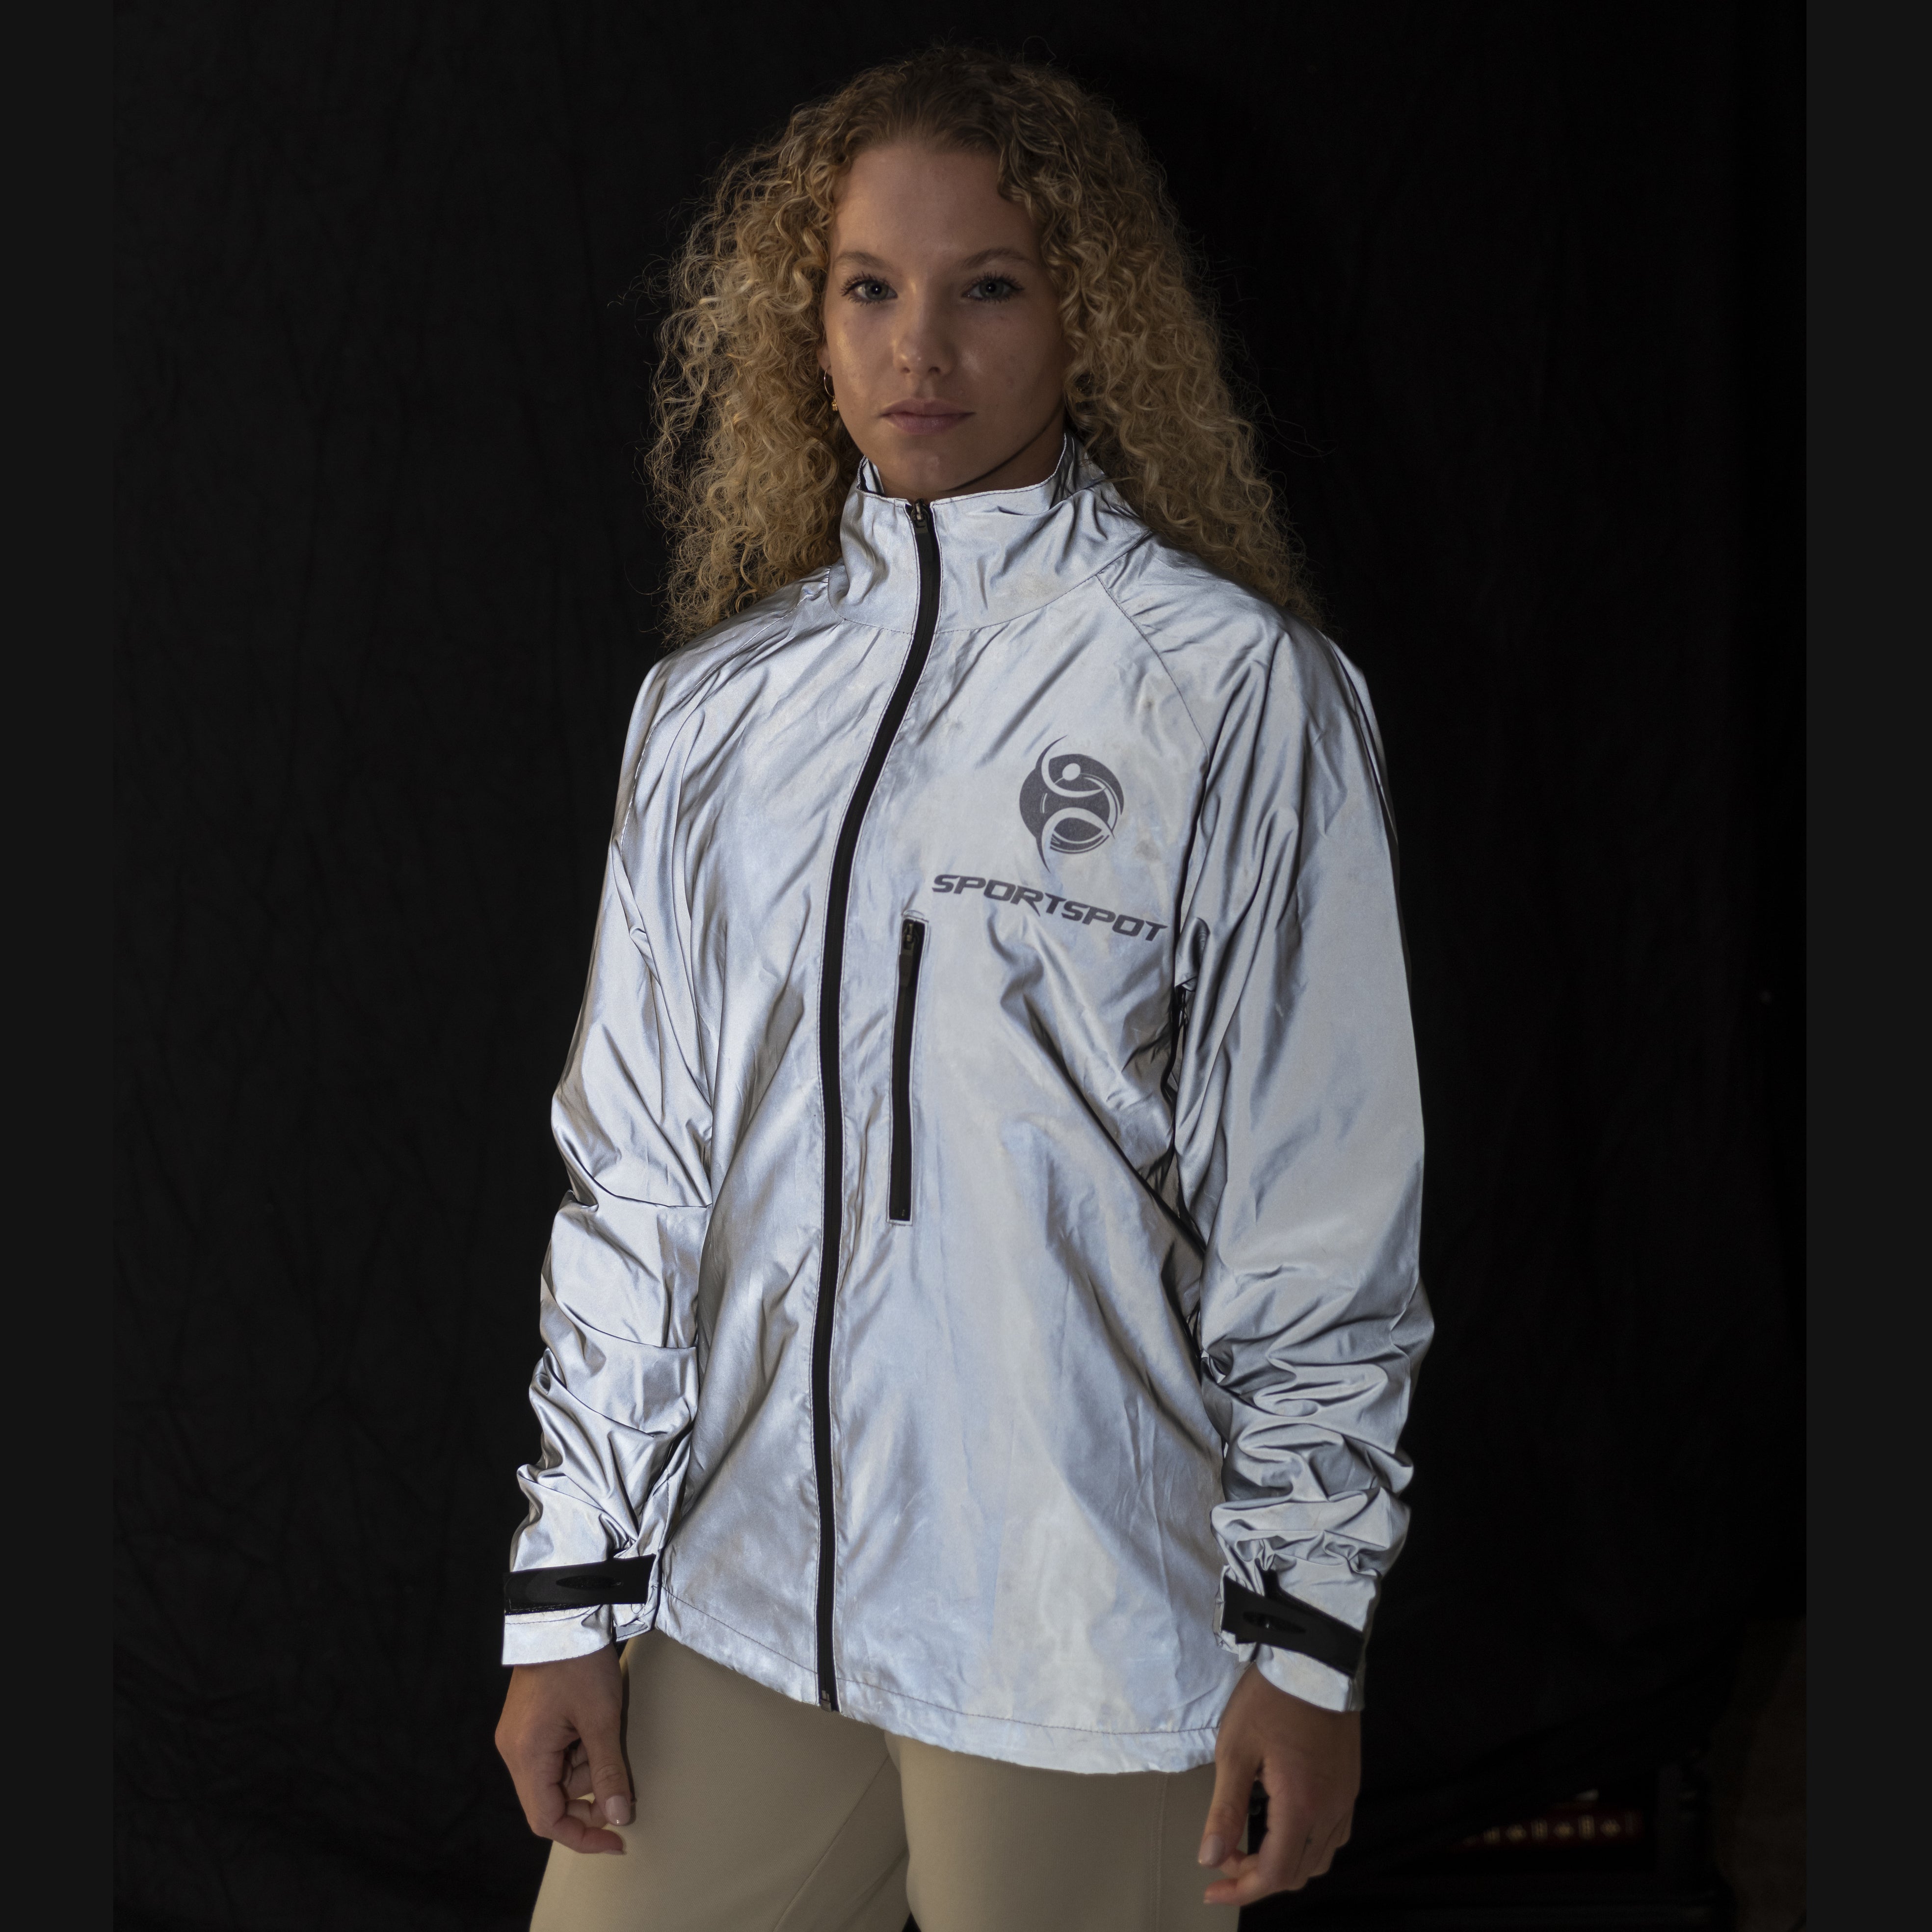 Kallie High Visibility Cycling Jacket for Women - Night Reflective